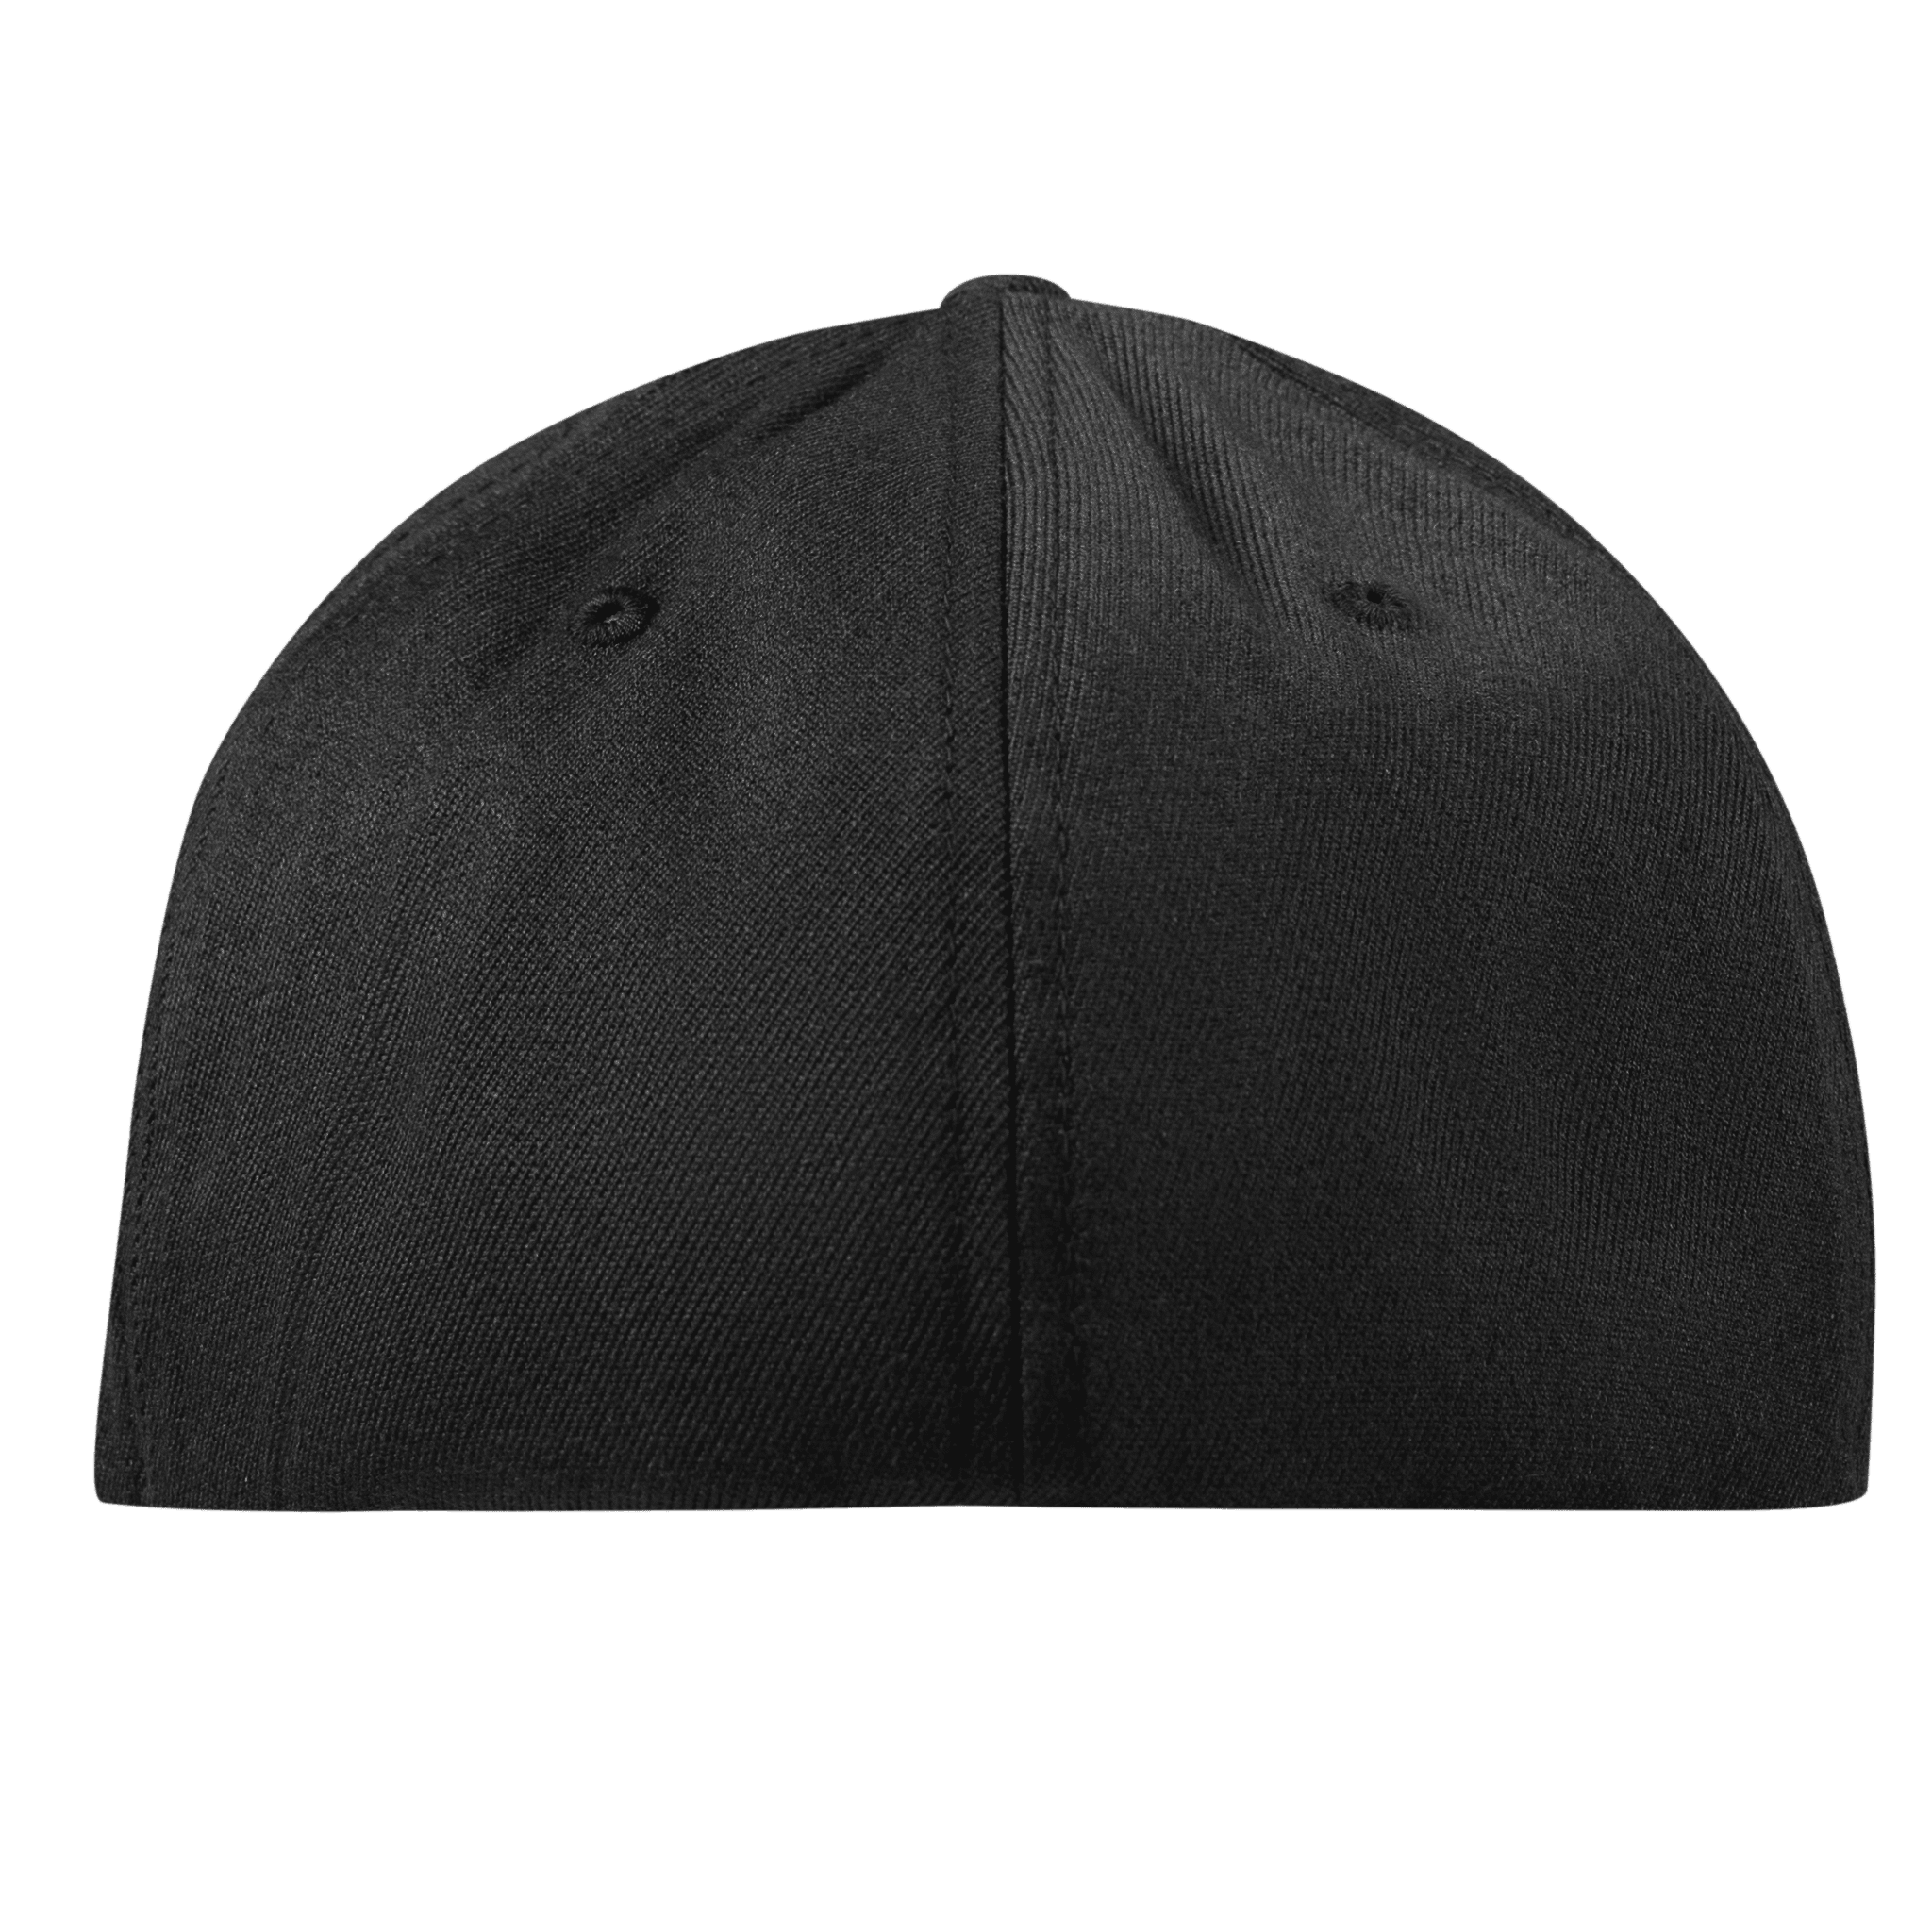 Wisconsin Patriot Flexfit Fitted Back Black